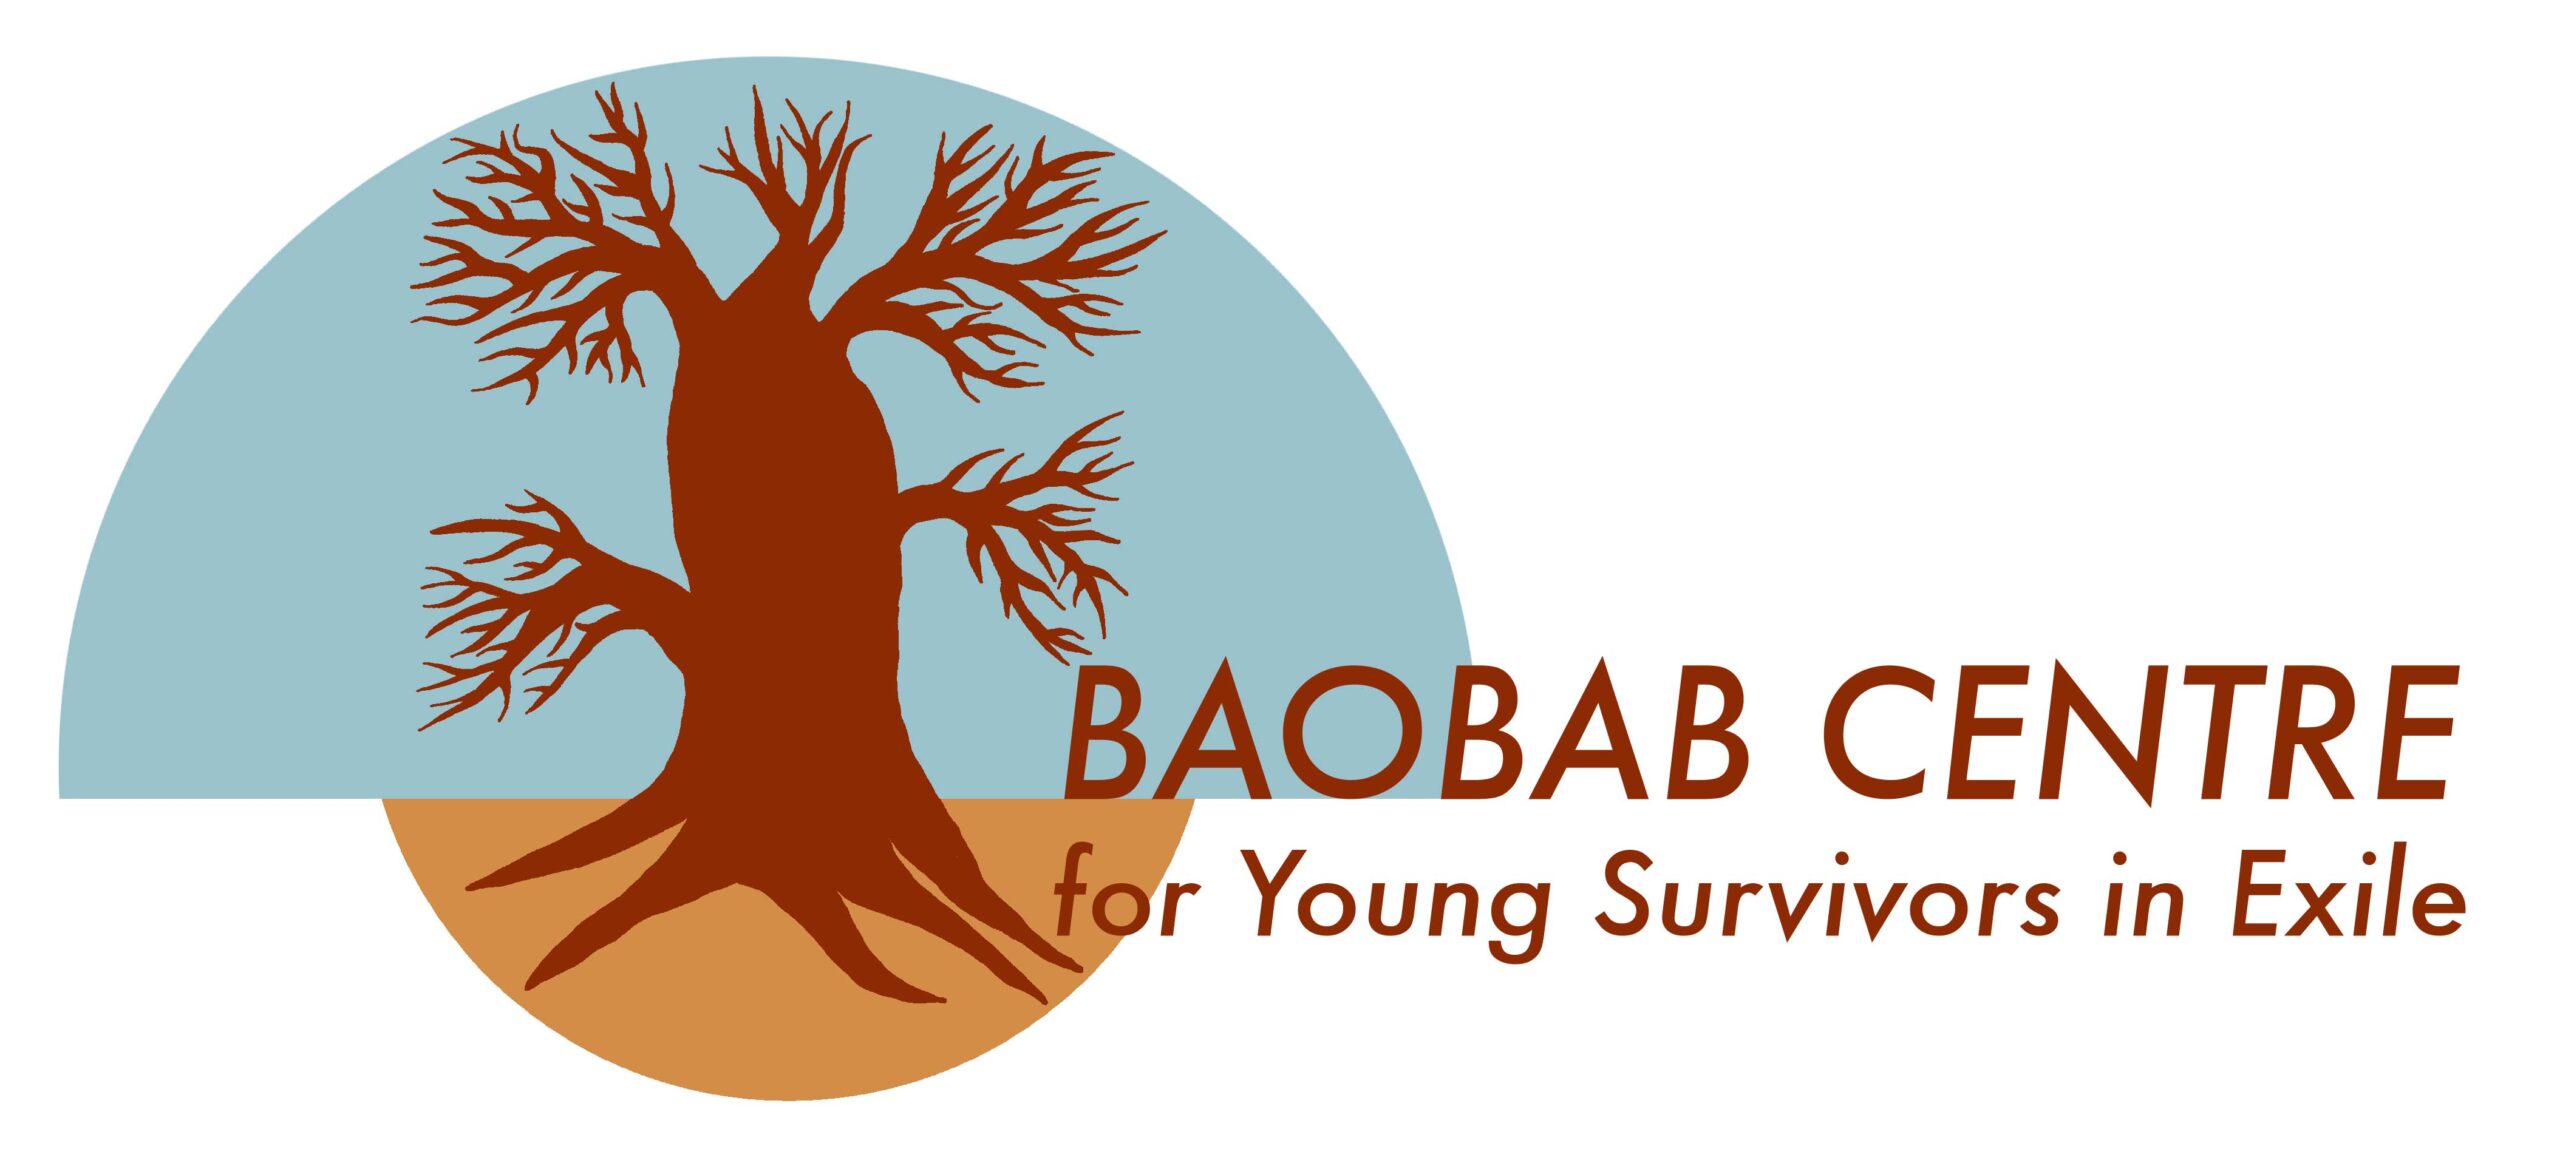 Baobab Center for Young Survivors in Exile